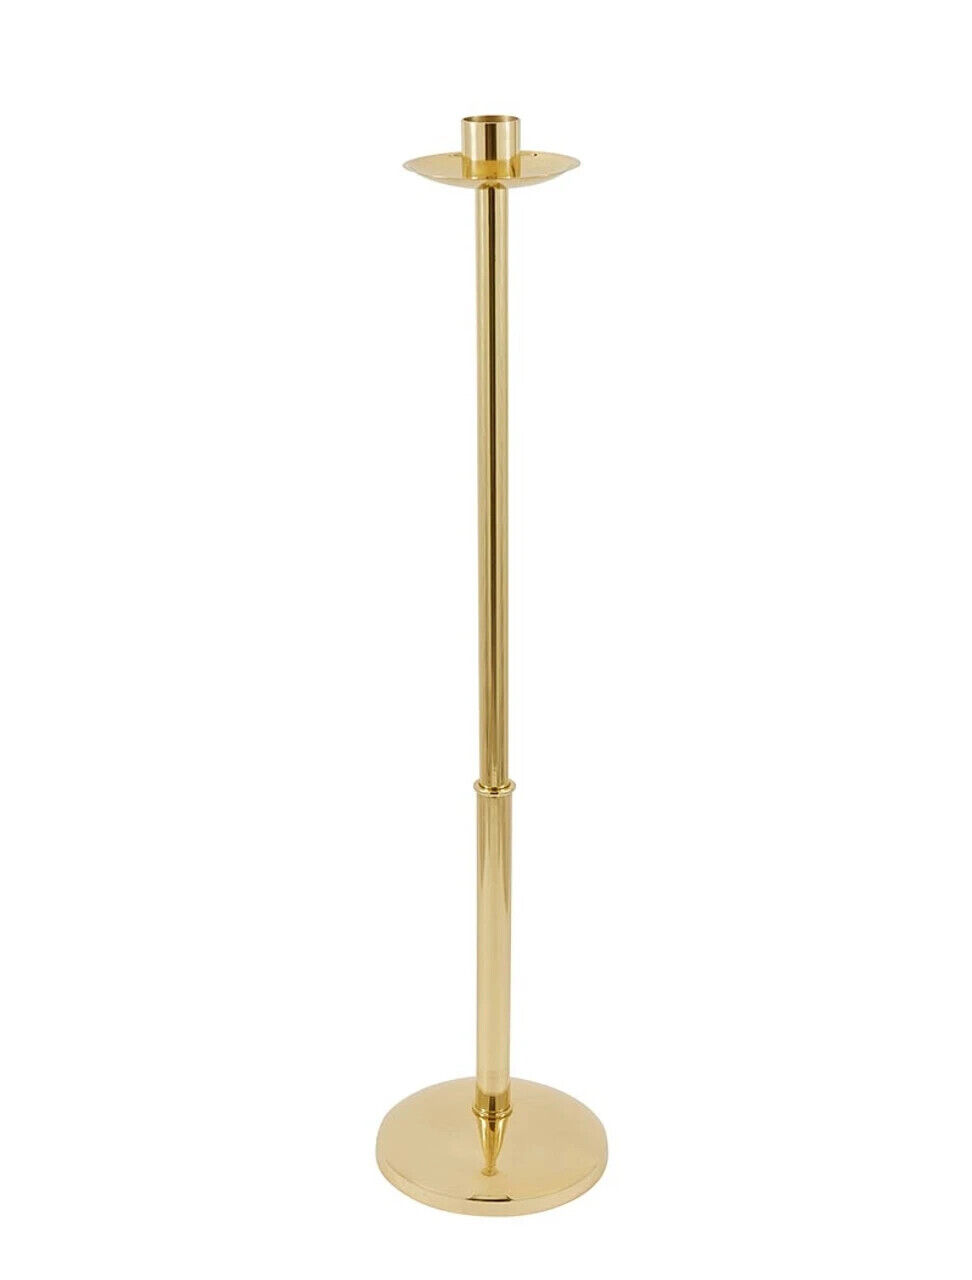 Sudbury Brass Simple Paschal Candlestick For Churches or Sanctuaries 44 In